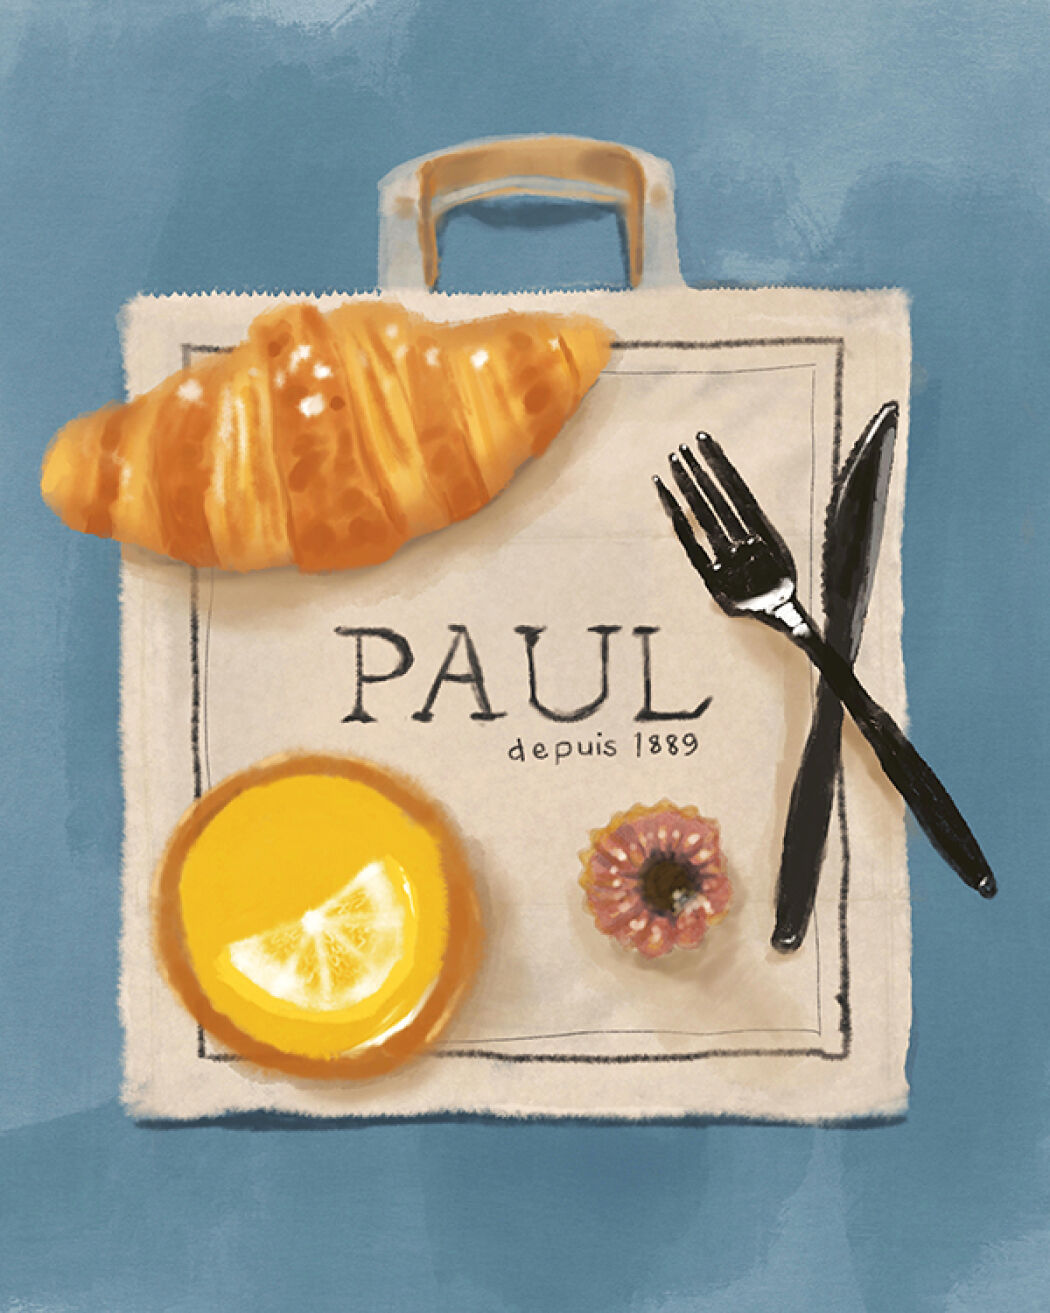 Branding illustration and art direction by Christina Gliha for Paul Bakery Shop, USA